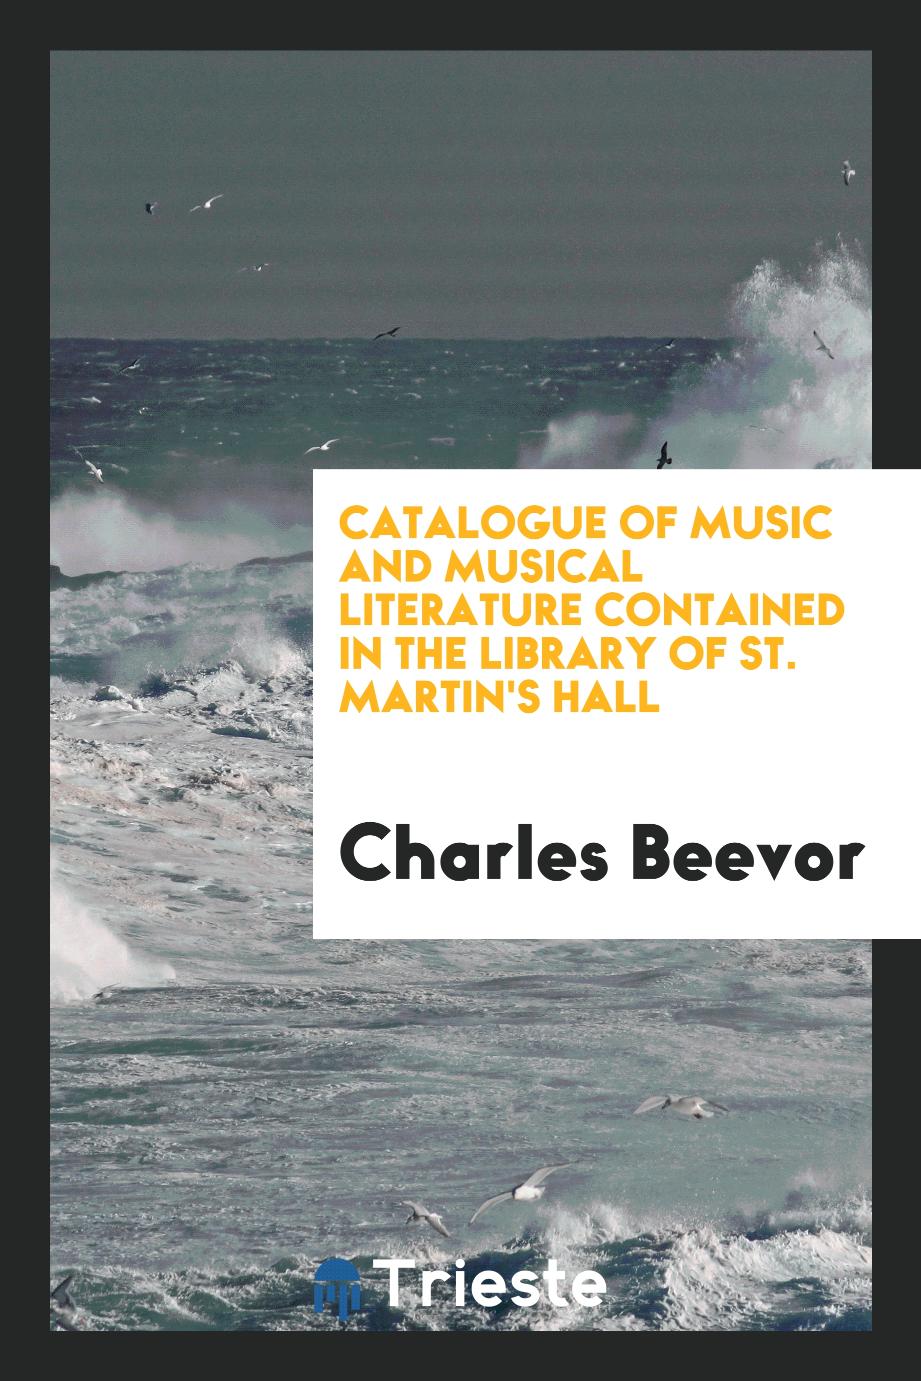 Catalogue of Music and Musical Literature contained in the Library of St. Martin's Hall